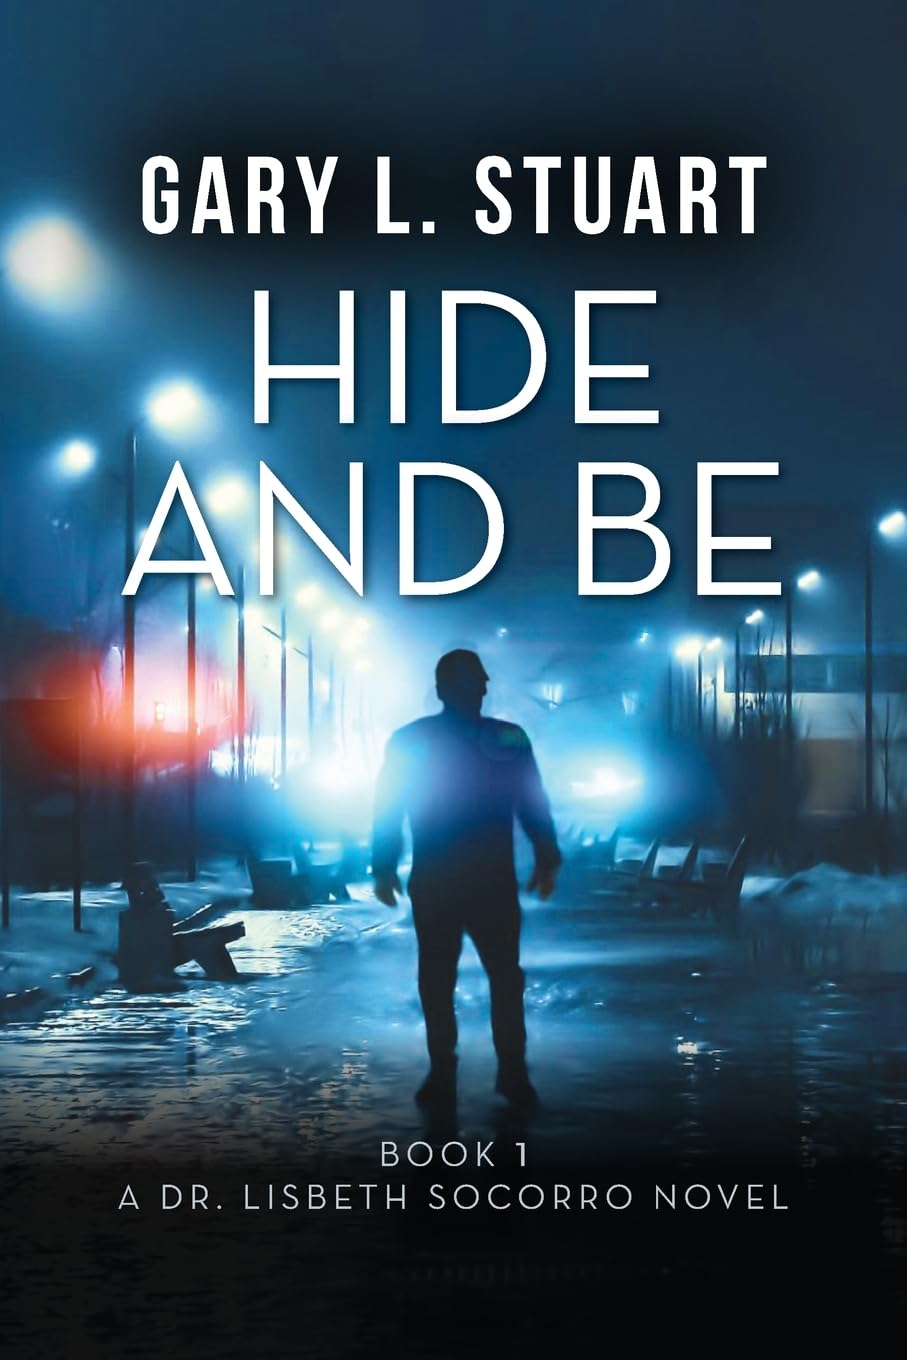 Gary L. Stuart: Book One – Hide and Be, Book Two – My Brother Myself